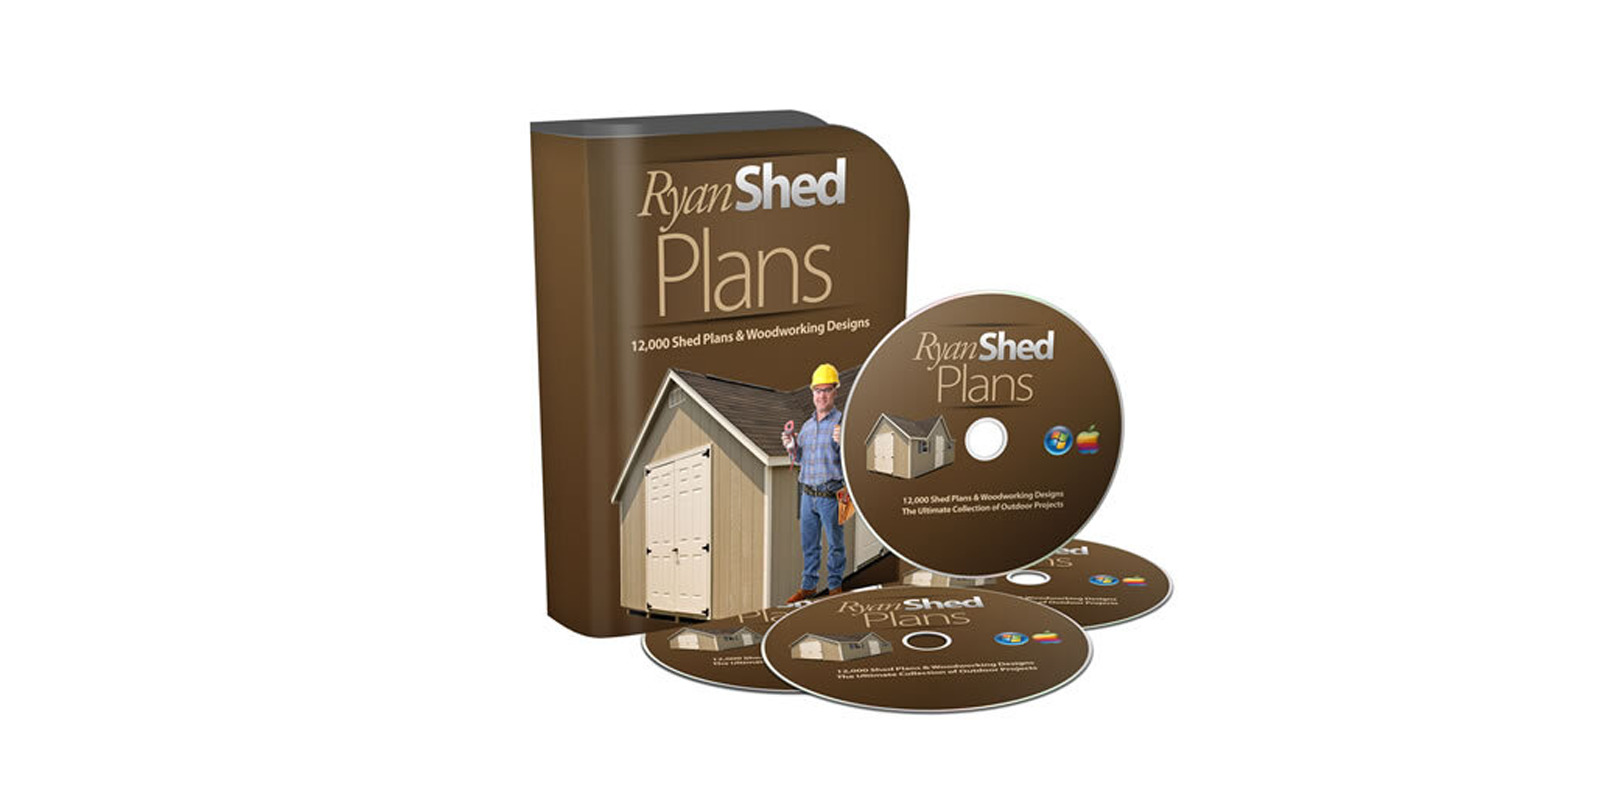 Ryan Shed Plans review